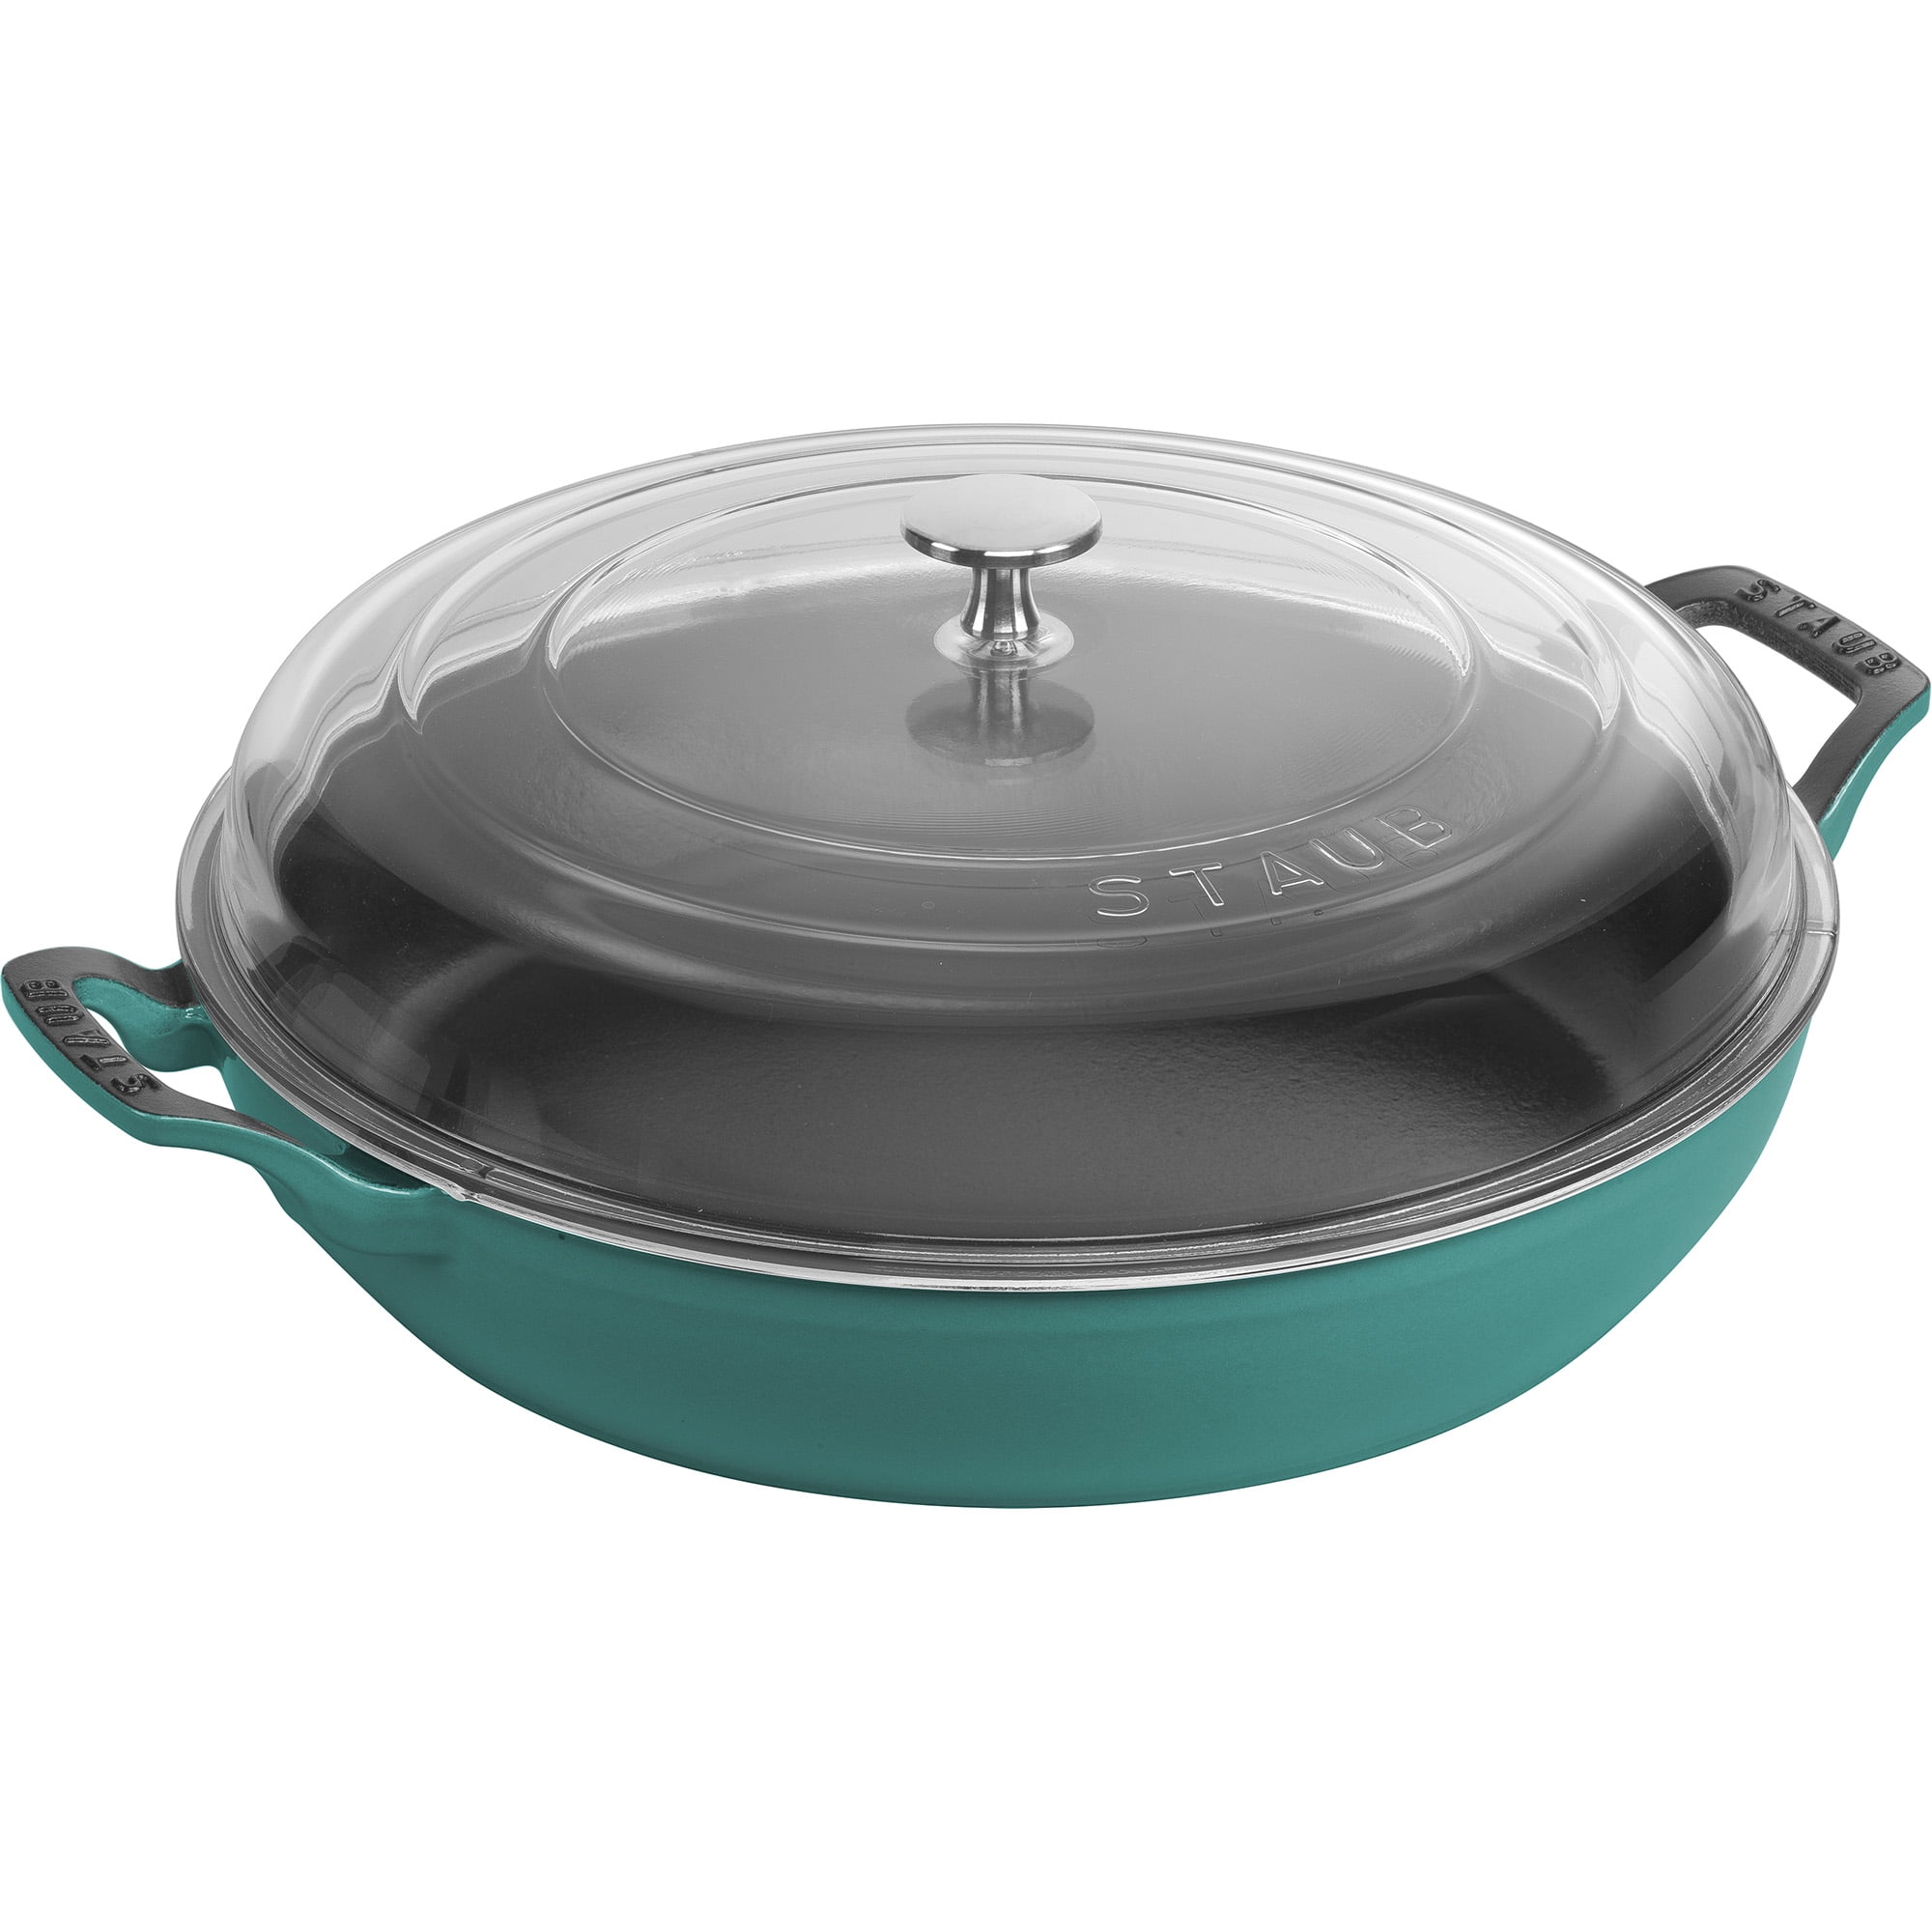 Buy Staub Cast Iron - Accessories Lid domed